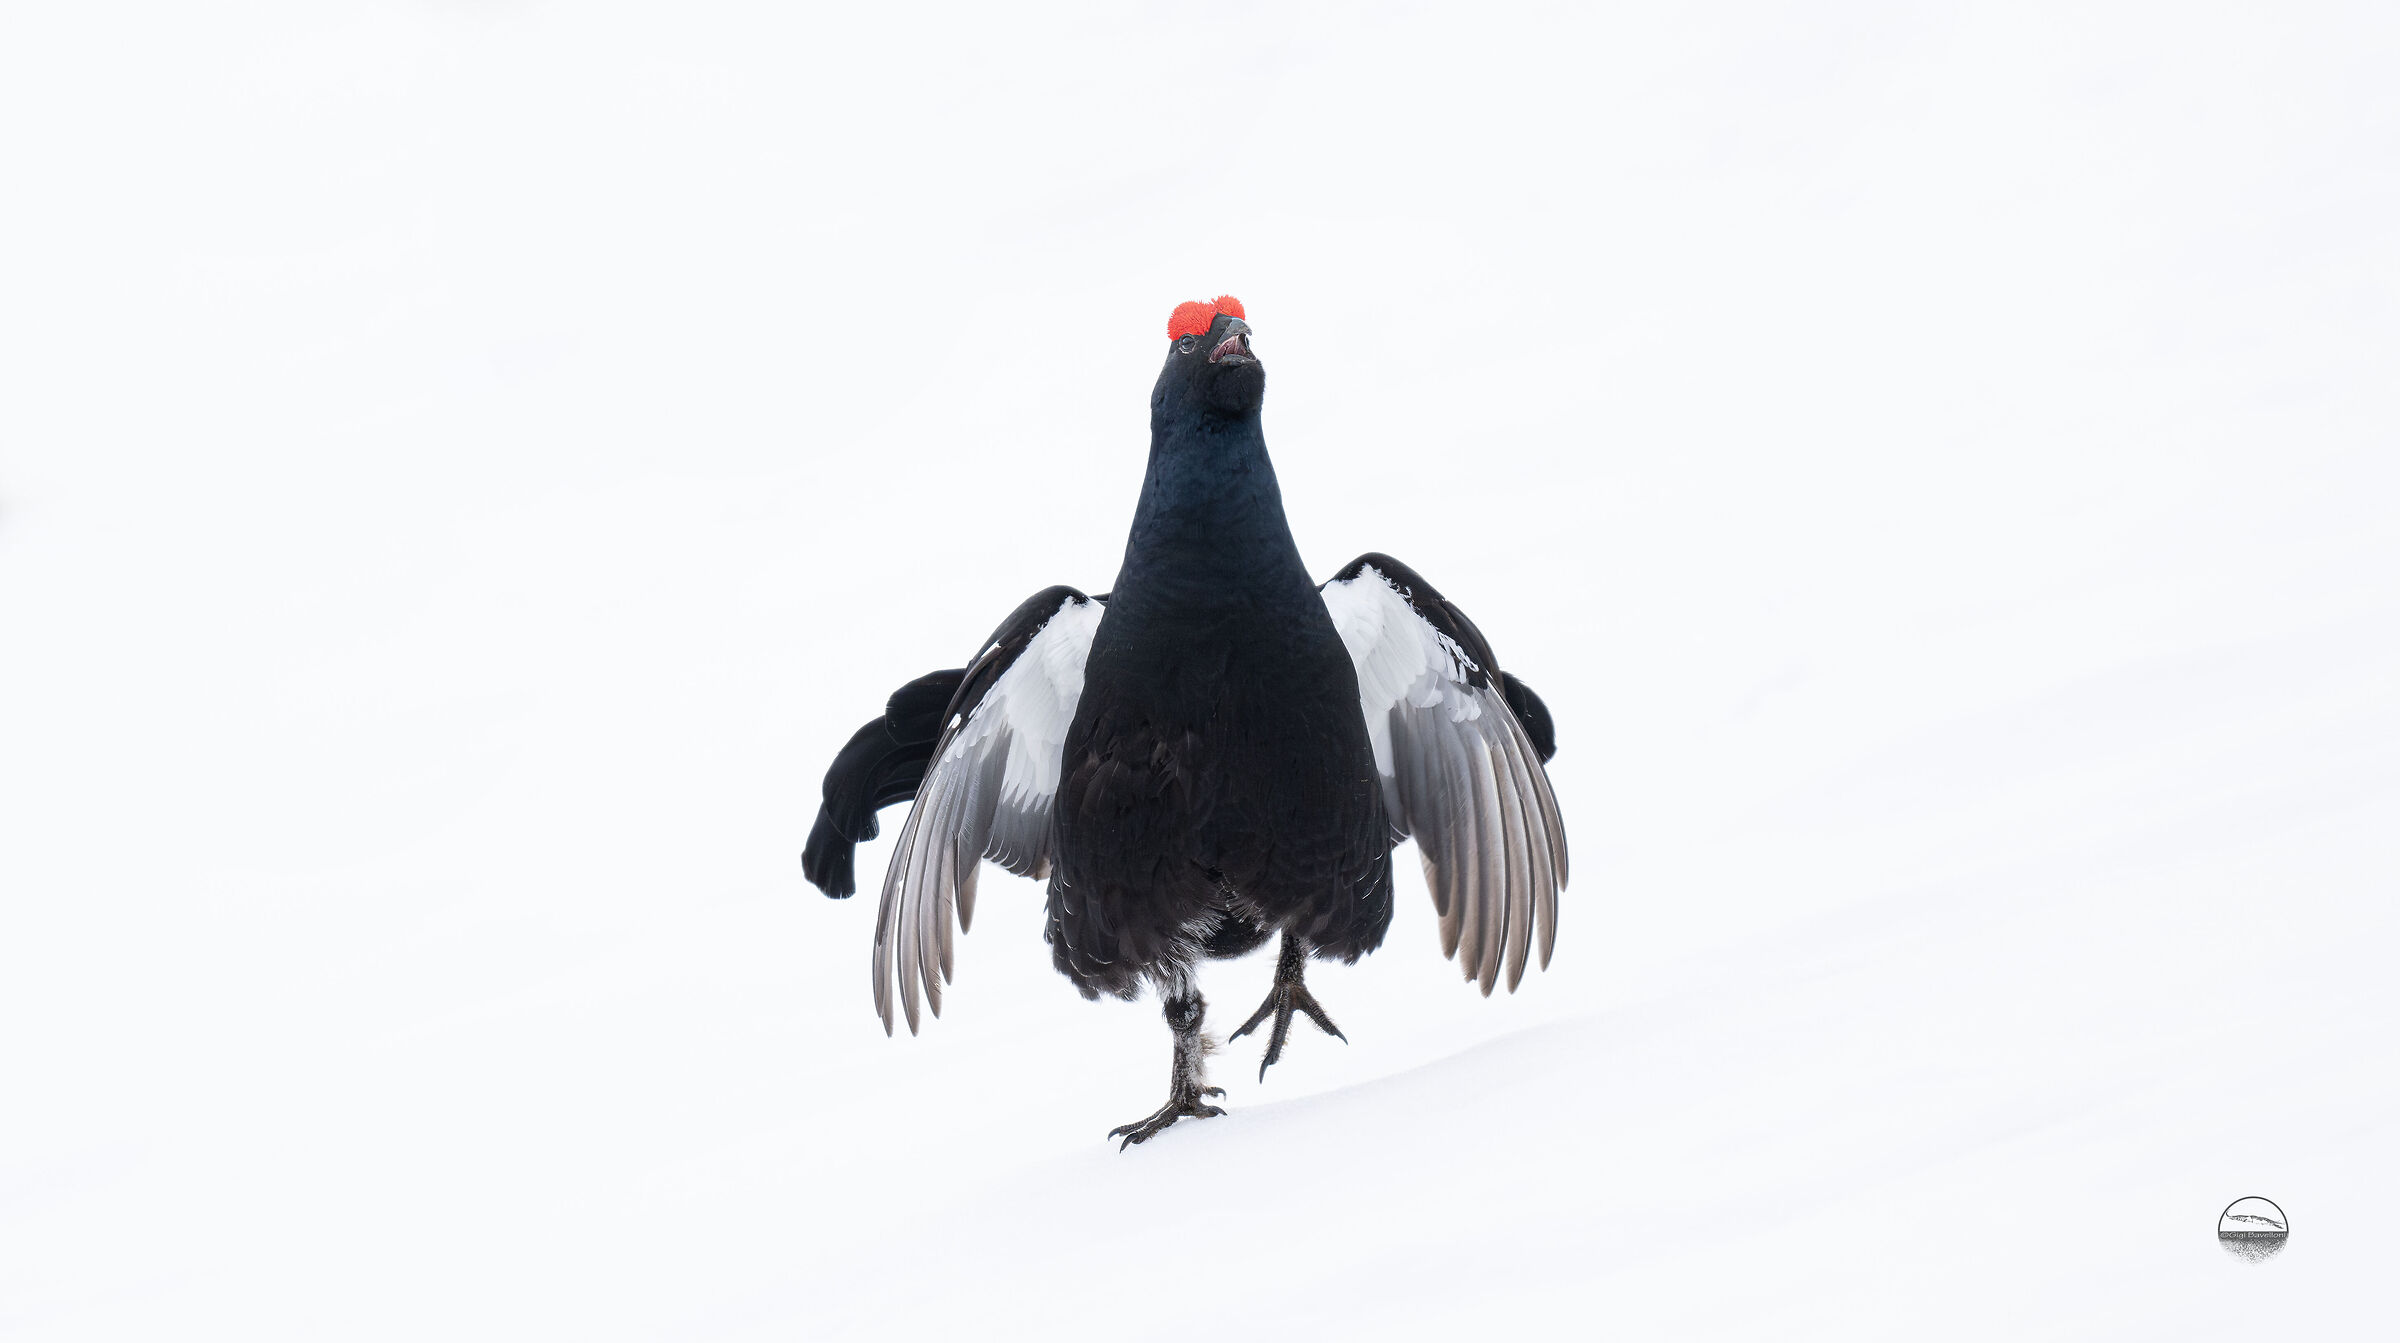 Black grouse in the snow...